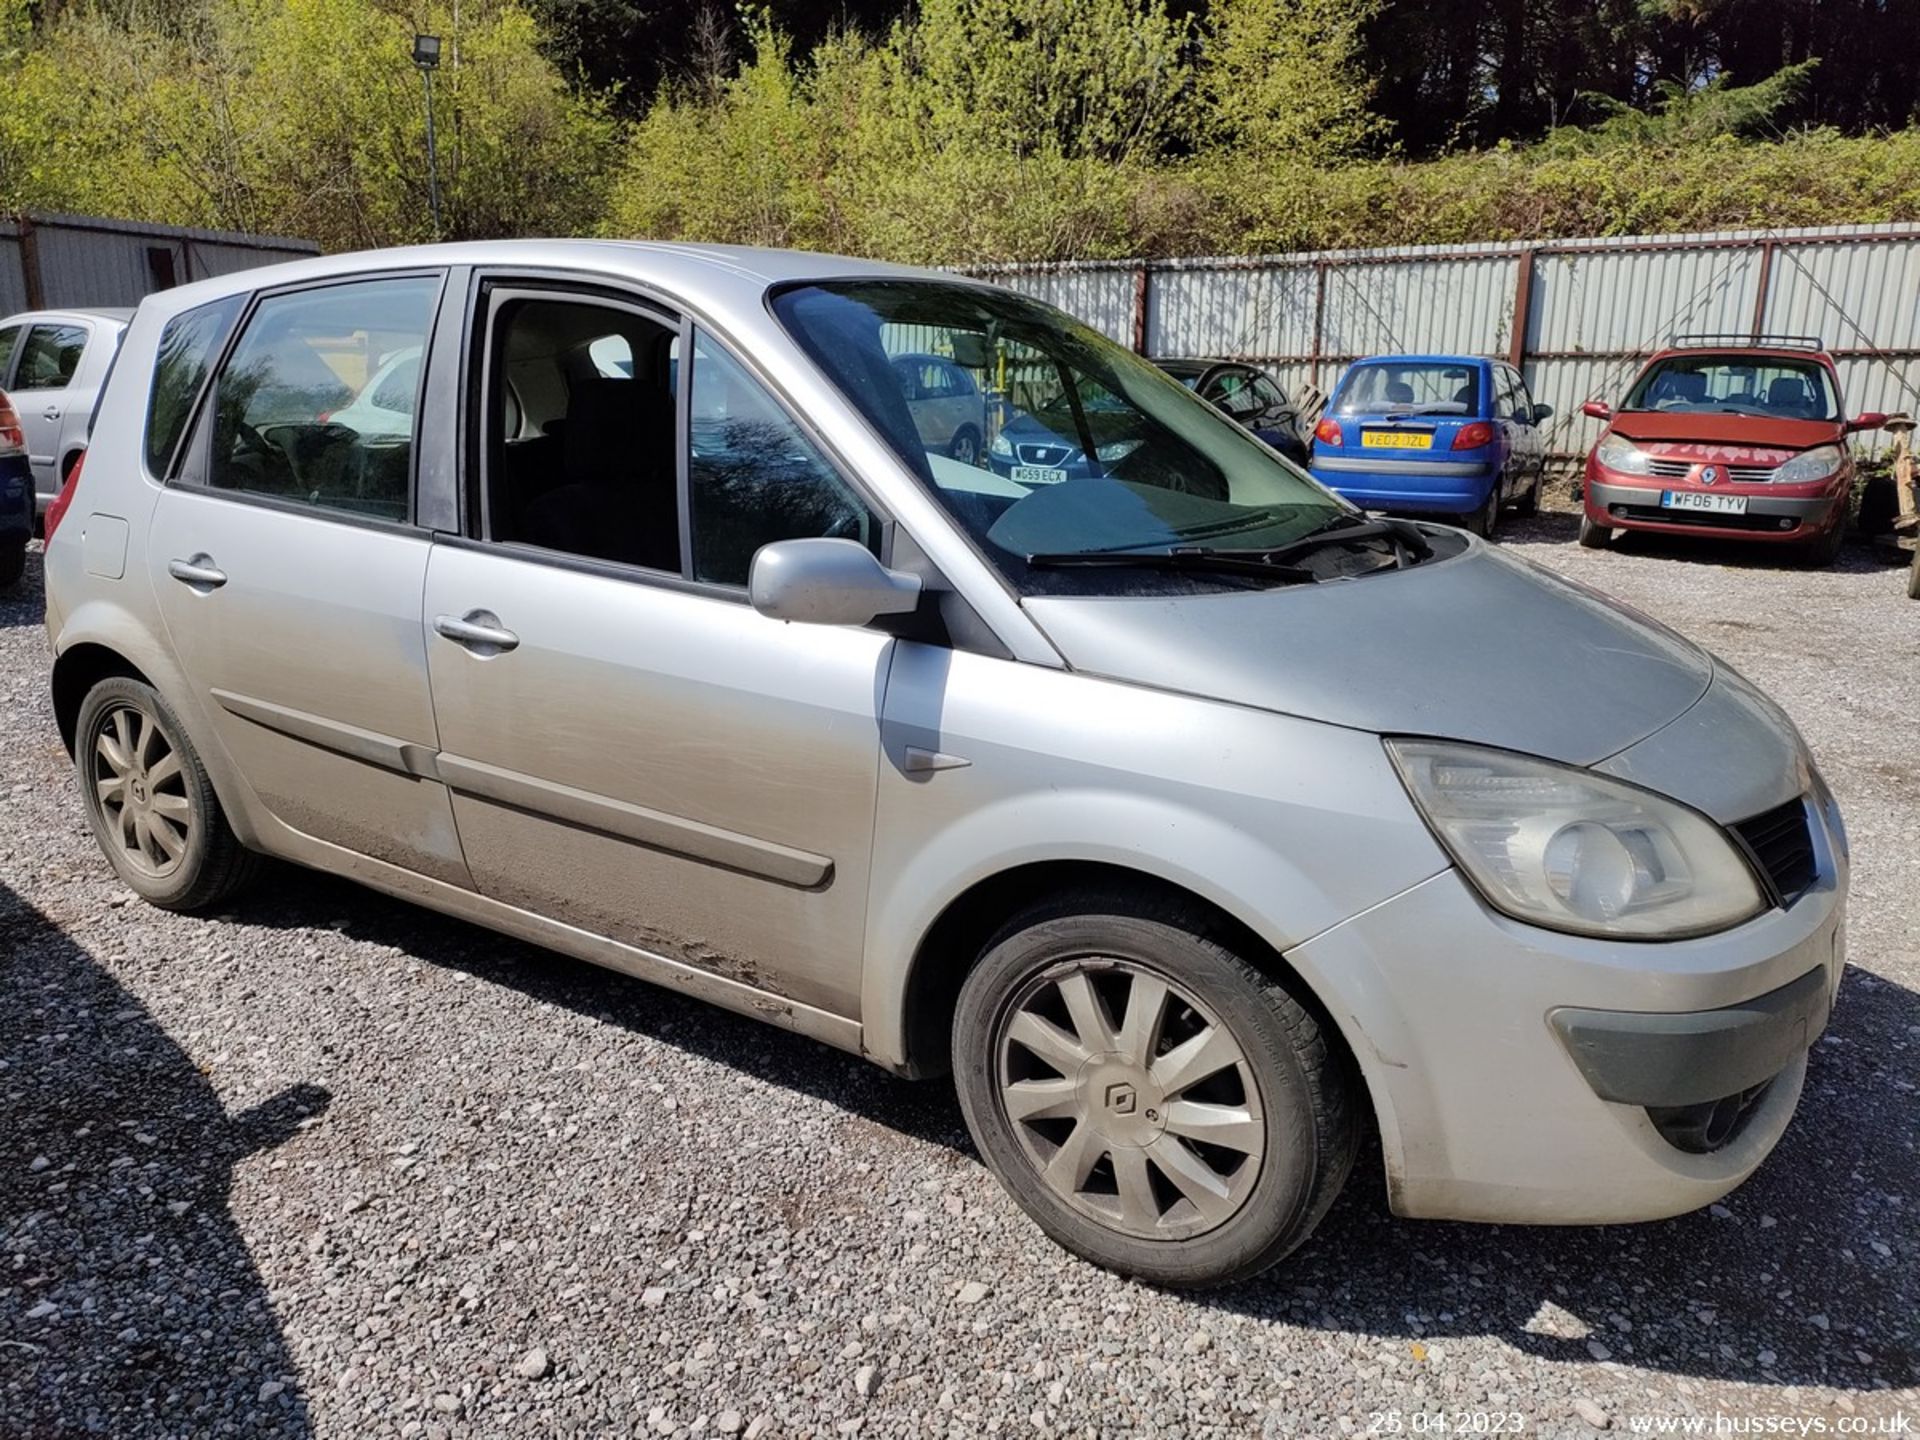 07/07 RENAULT SCENIC DYN VVT - 1598cc 5dr MPV (Silver) - Image 3 of 34